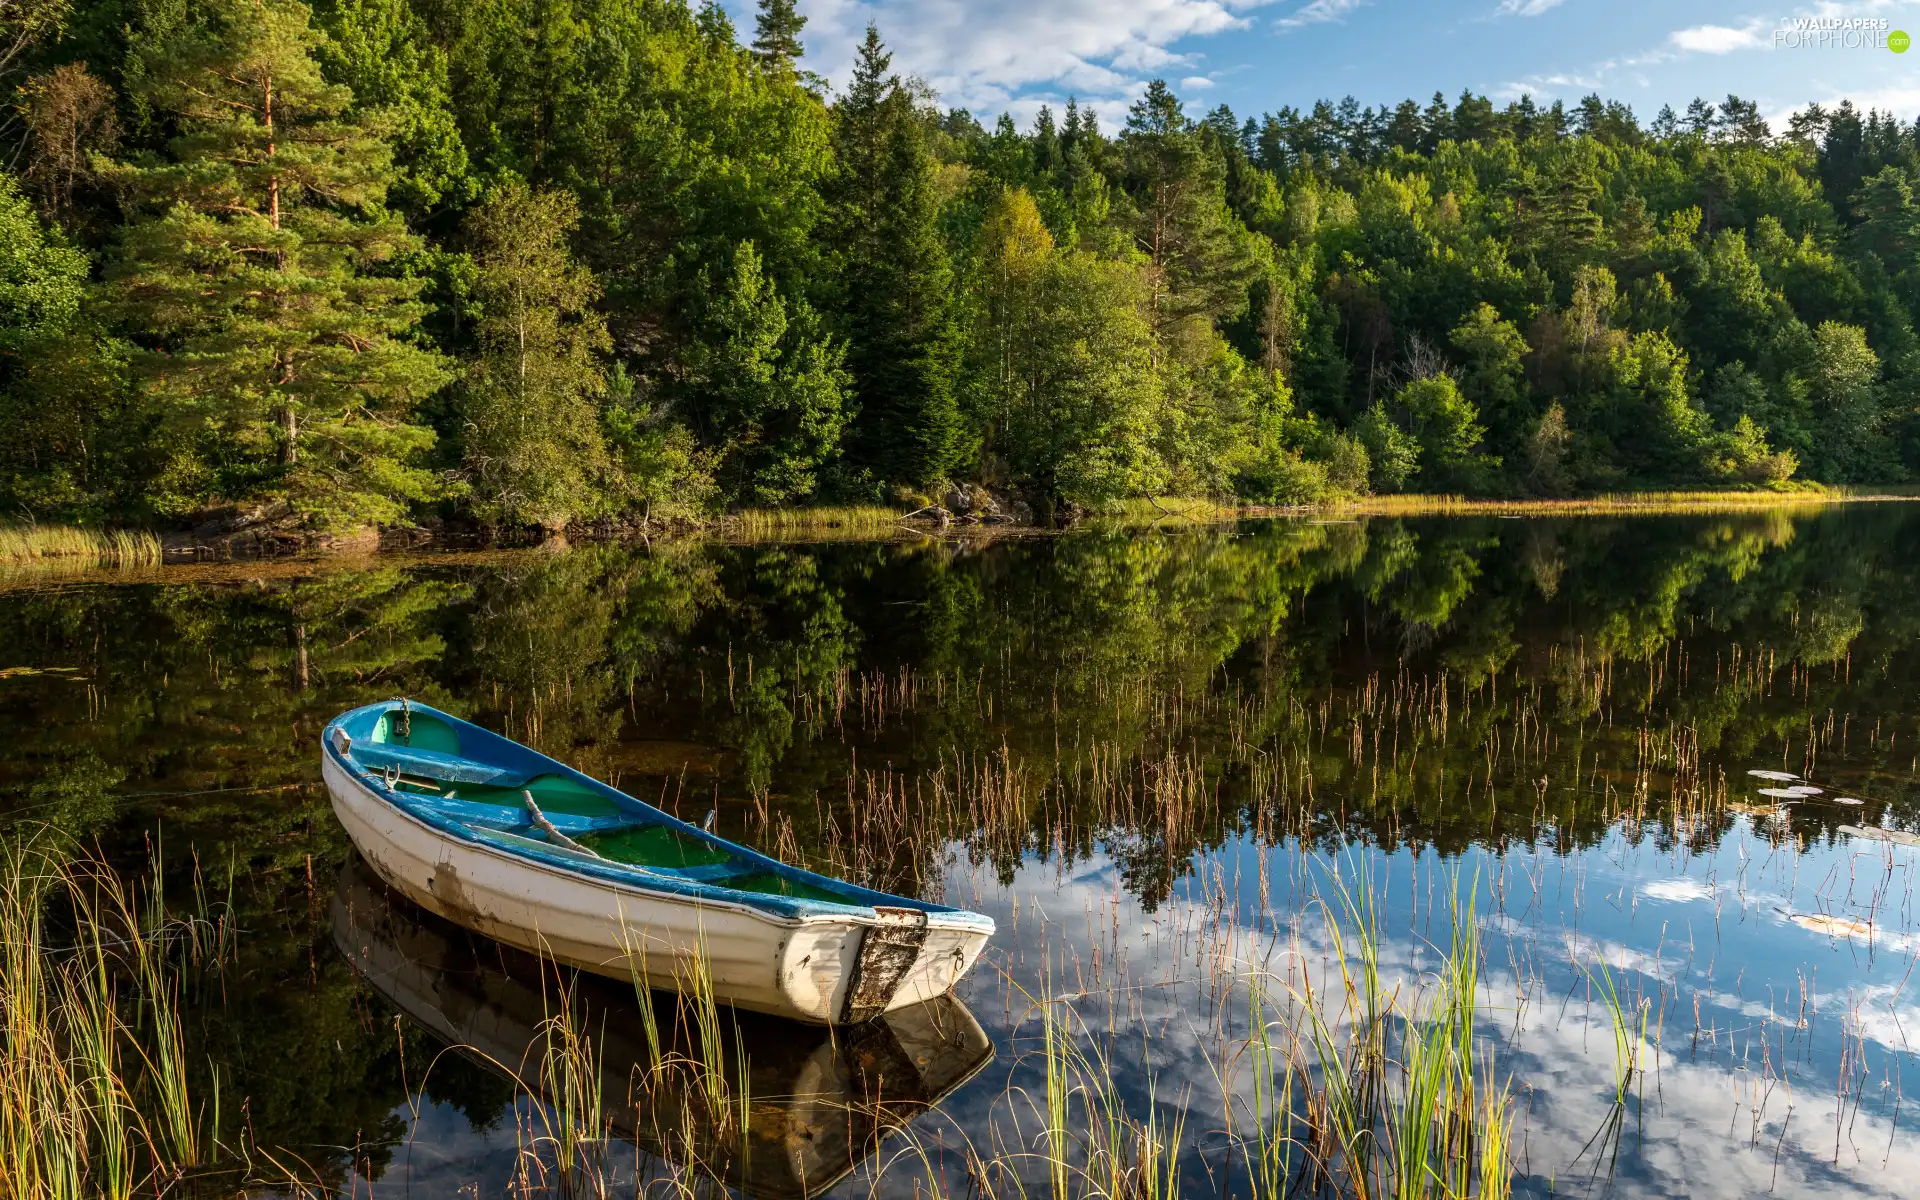 viewes, forest, reflection, Boat, lake, trees